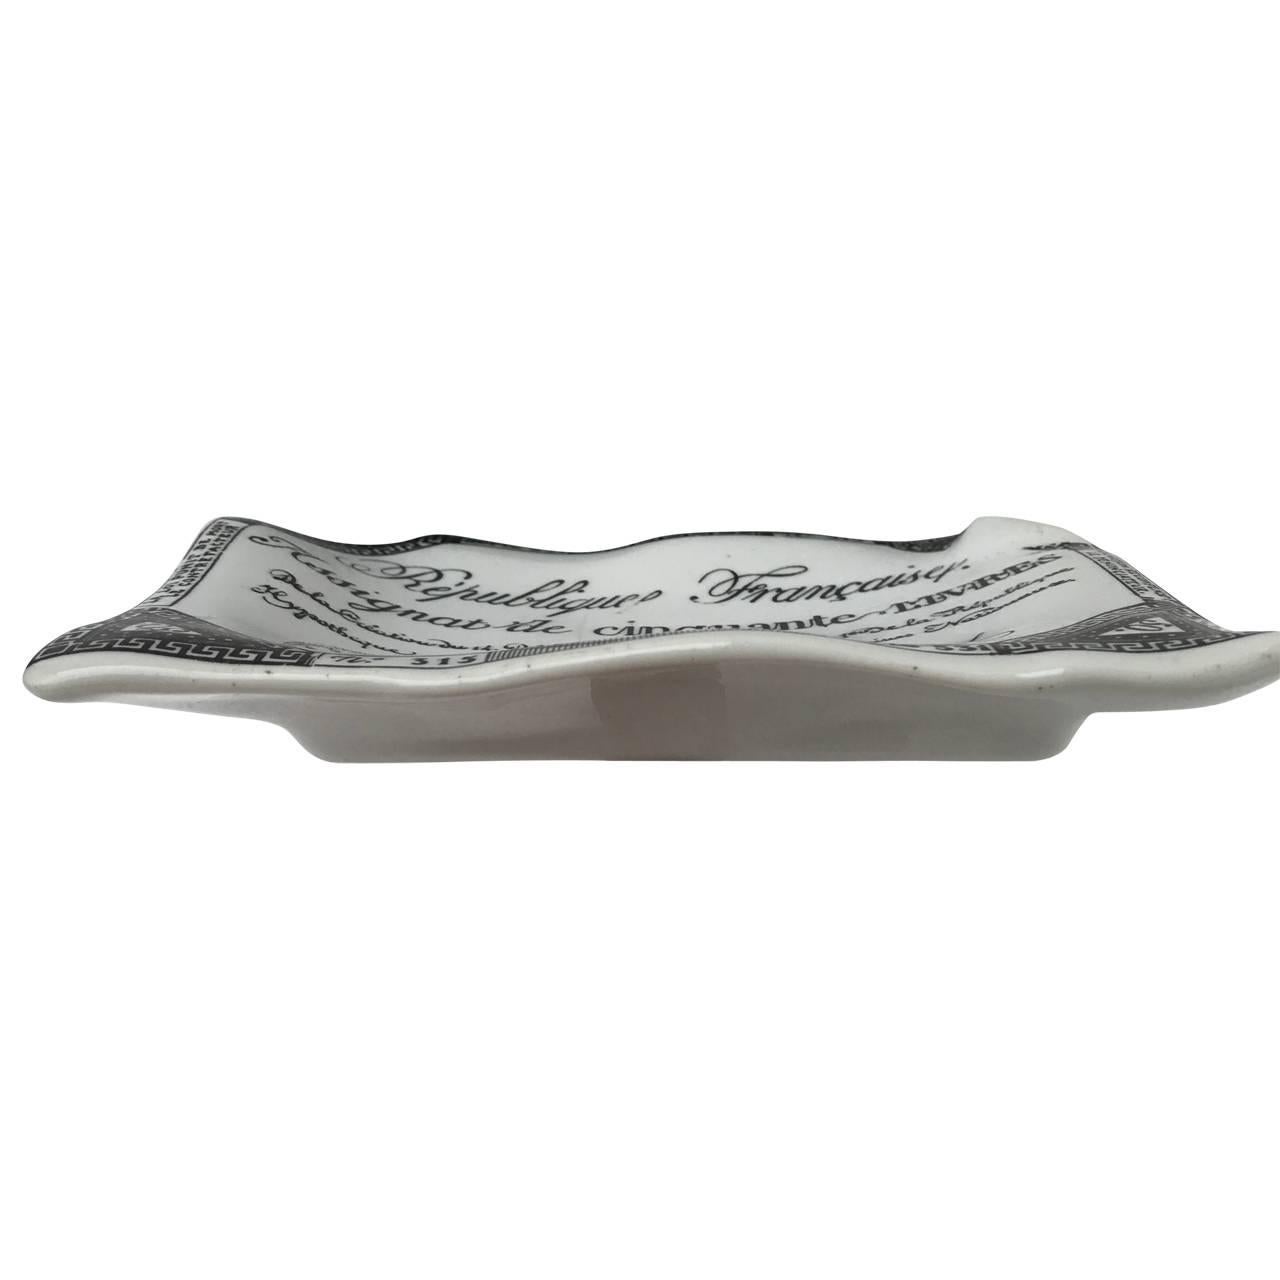 Vintage Fornasetti porcelain dish as a ashtray or pin tray

Complementary delivery to New York City.